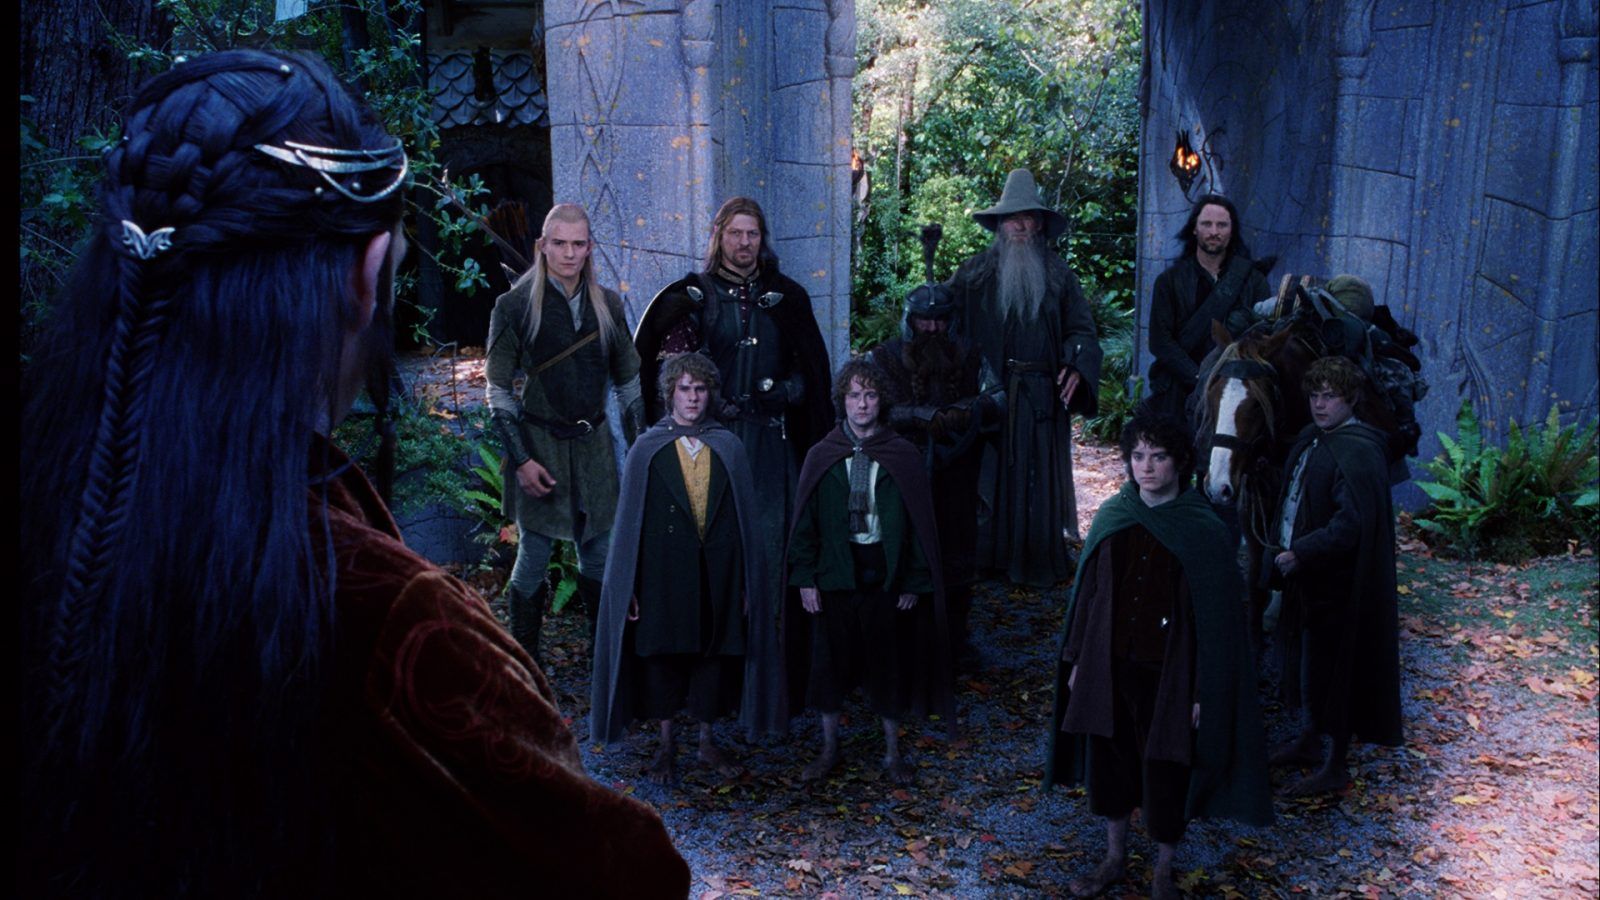 Lord of the Rings: Fellowship of the Ring by Captain Madbeard on Prezi